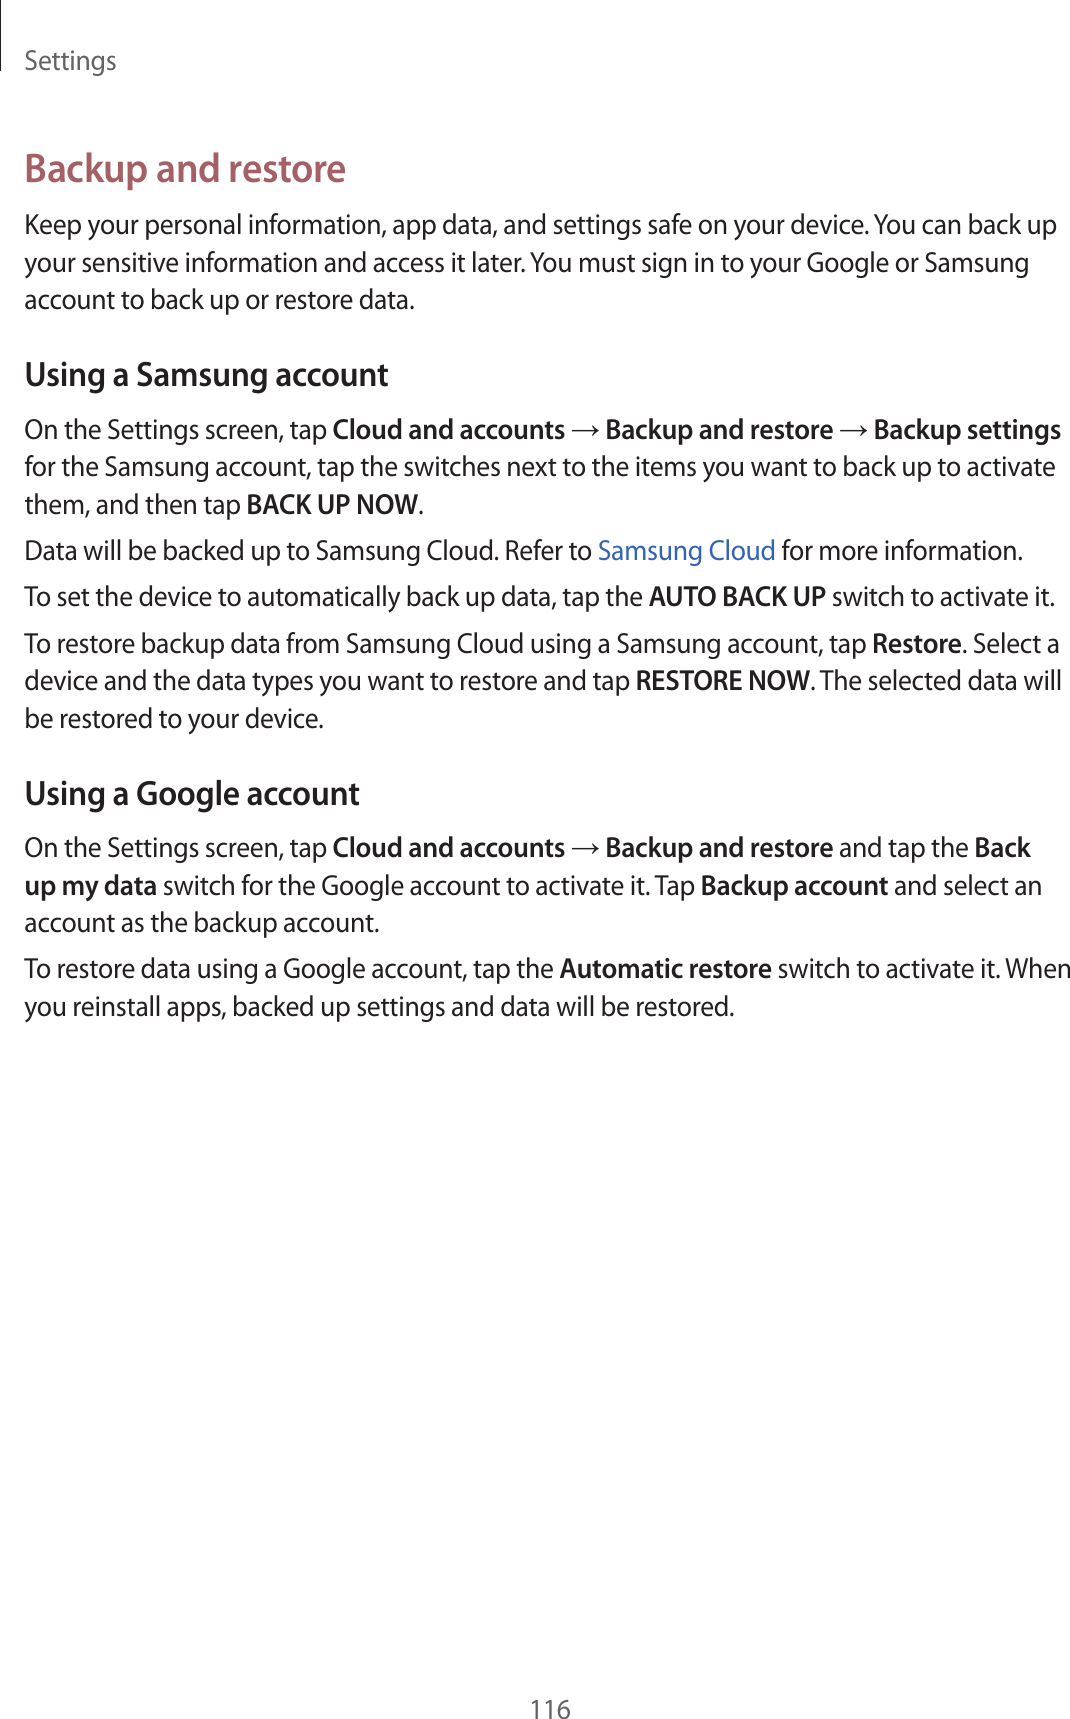 Settings116Backup and restoreKeep your personal information, app data, and settings safe on your device. You can back up your sensitive information and access it later. You must sign in to your Google or Samsung account to back up or restore data.Using a Samsung accountOn the Settings screen, tap Cloud and accounts → Backup and restore → Backup settings for the Samsung account, tap the switches next to the items you want to back up to activate them, and then tap BACK UP NOW.Data will be backed up to Samsung Cloud. Refer to Samsung Cloud for more information.To set the device to automatically back up data, tap the AUTO BACK UP switch to activate it.To restore backup data from Samsung Cloud using a Samsung account, tap Restore. Select a device and the data types you want to restore and tap RESTORE NOW. The selected data will be restored to your device.Using a Google accountOn the Settings screen, tap Cloud and accounts → Backup and restore and tap the Back up my data switch for the Google account to activate it. Tap Backup account and select an account as the backup account.To restore data using a Google account, tap the Automatic restore switch to activate it. When you reinstall apps, backed up settings and data will be restored.